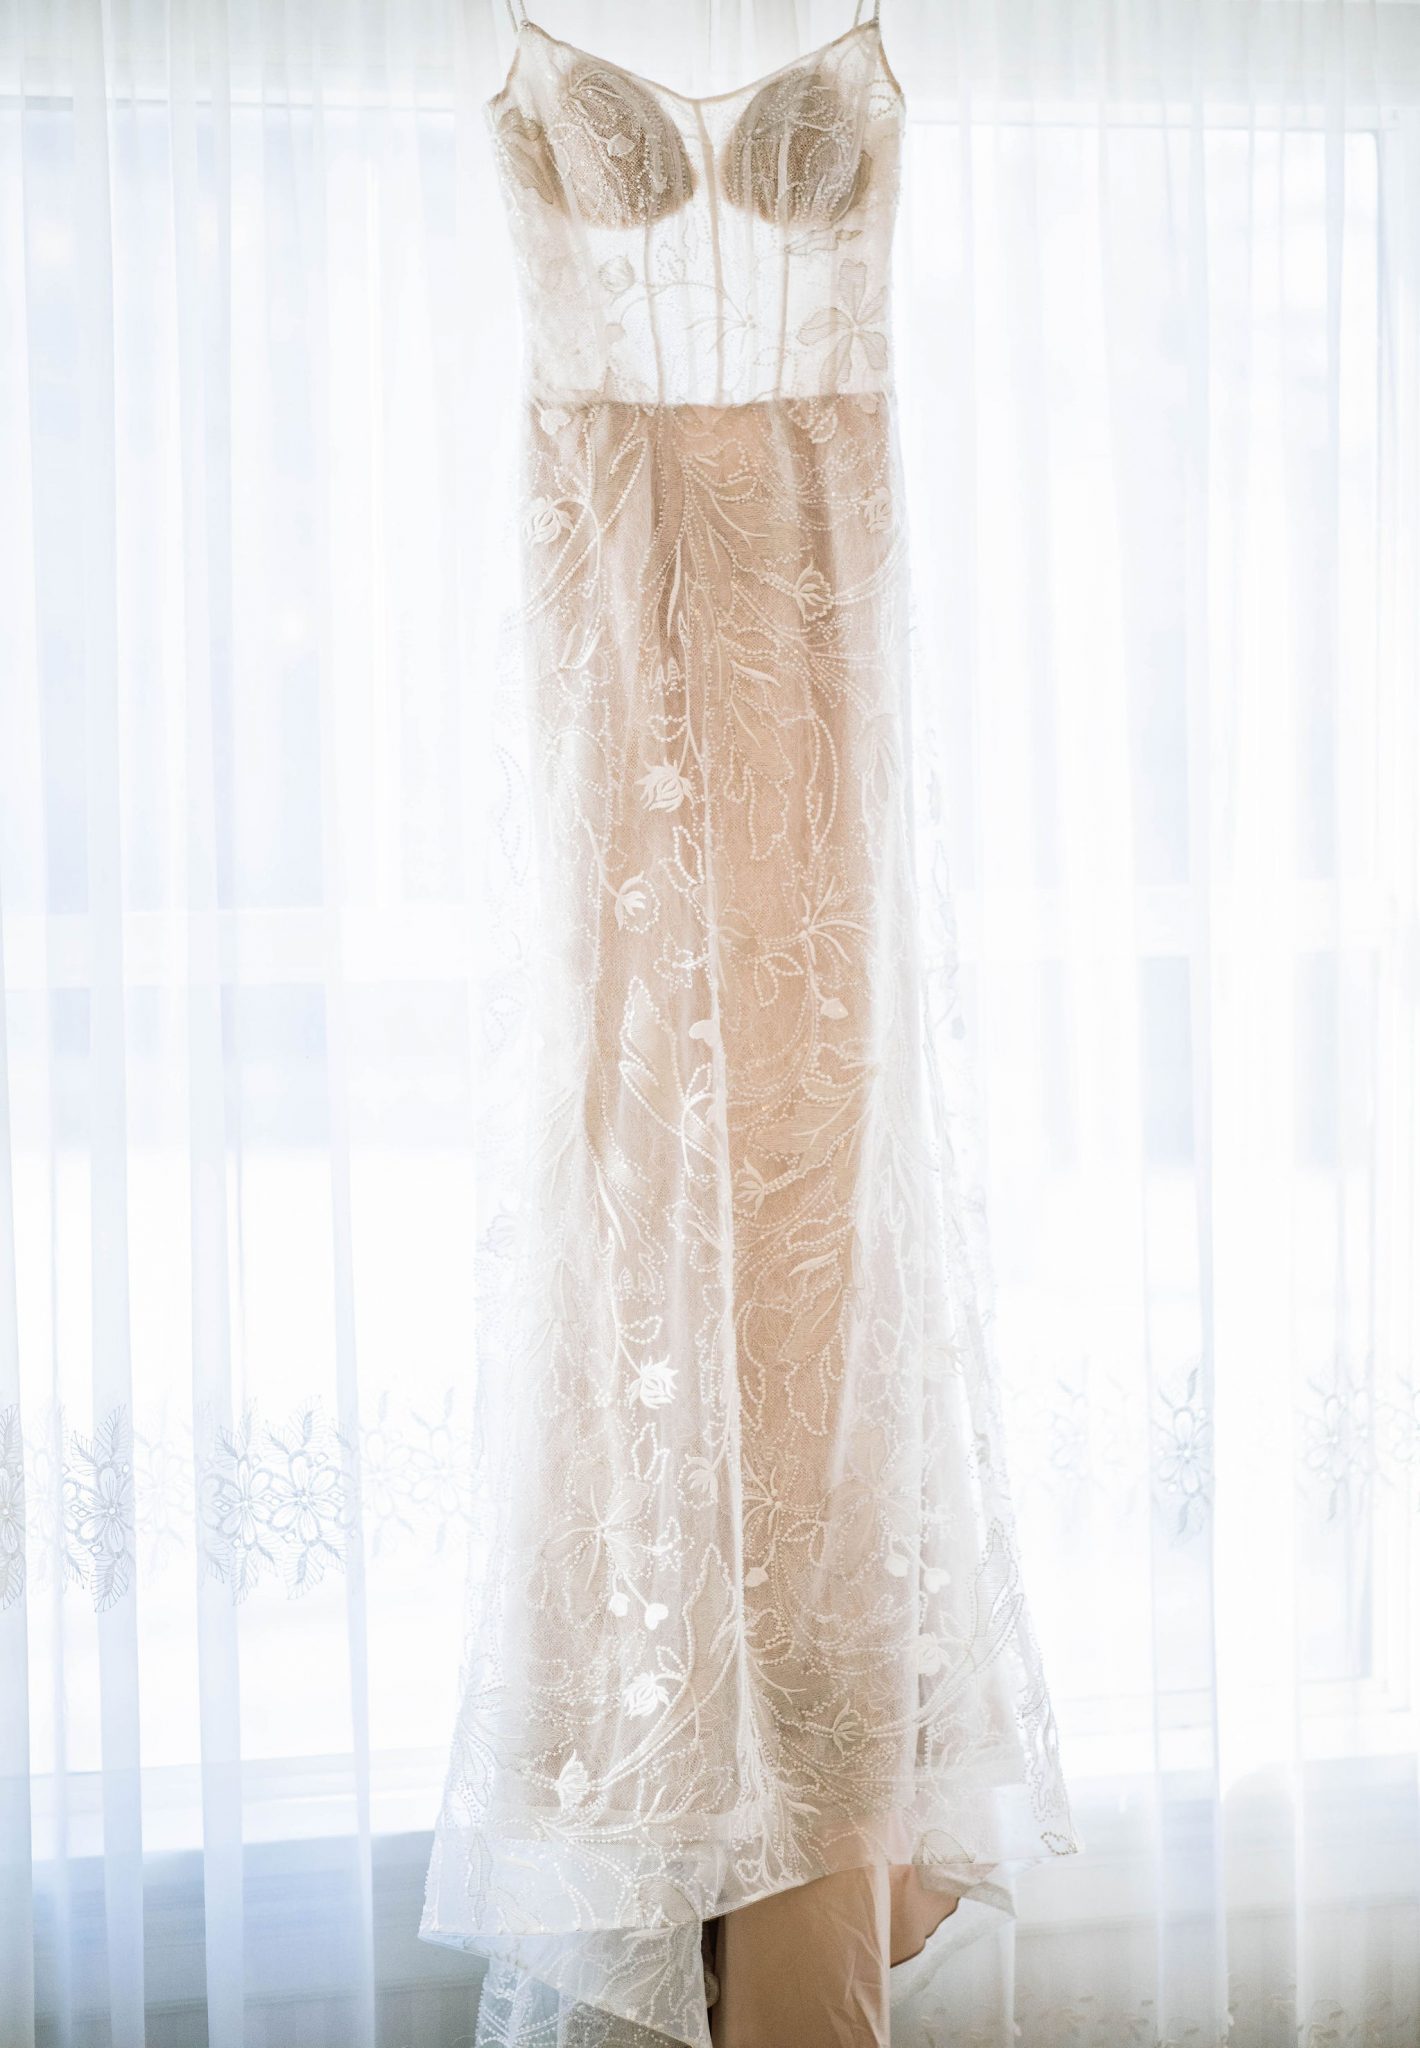 Lace off-white gown hangs in the window at the Norland Historic Estate Venue